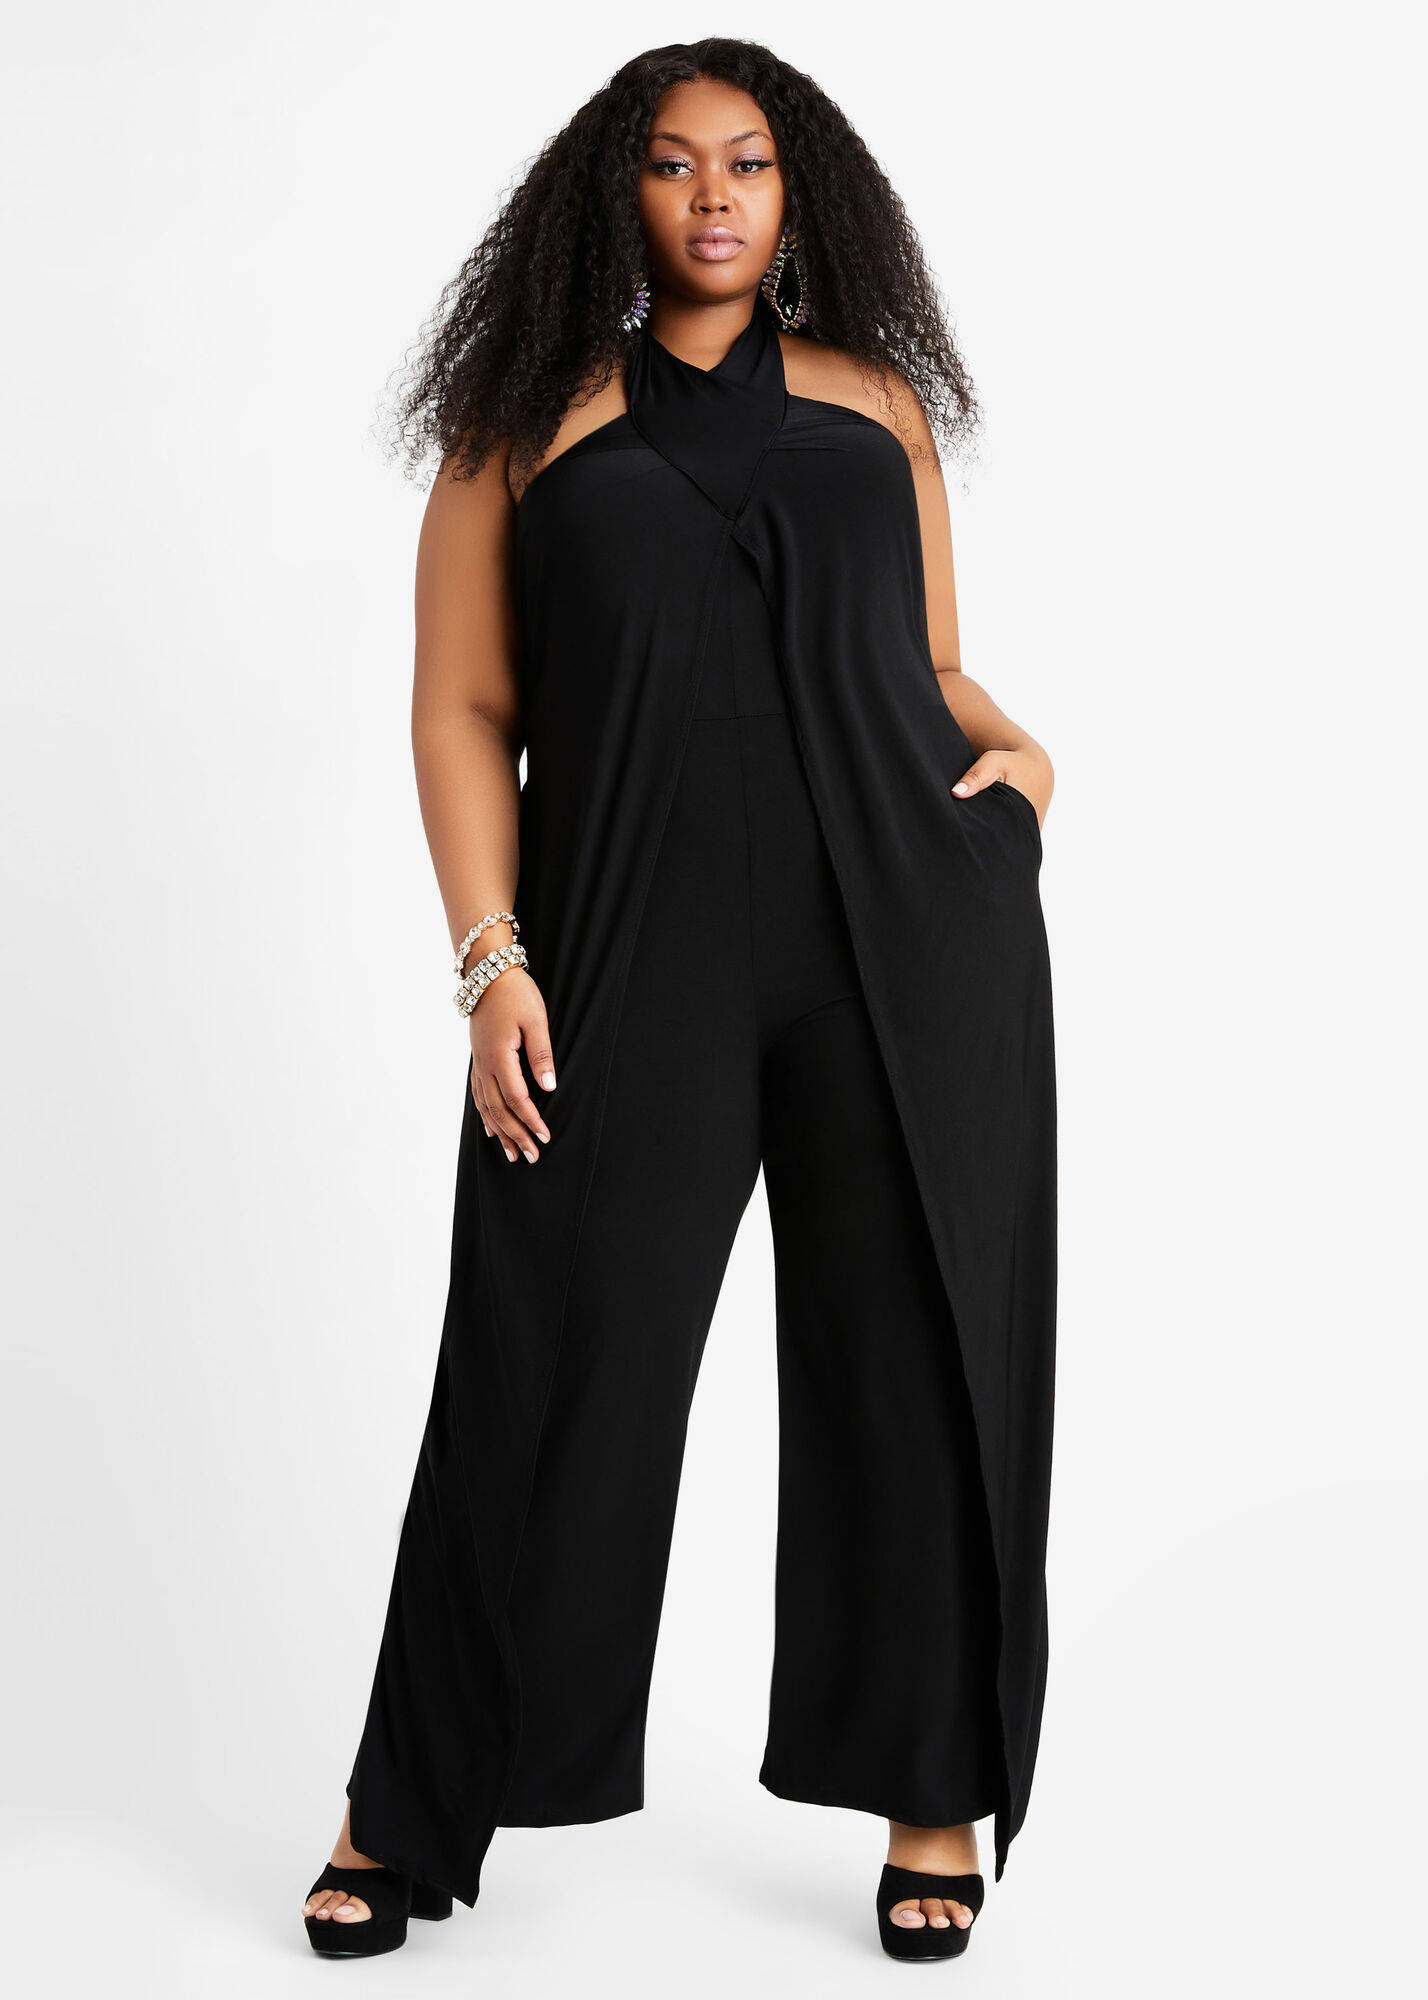 Plus Size Halter Knit Wide Leg Overlay Open Back Sexy Party Jumpsuit